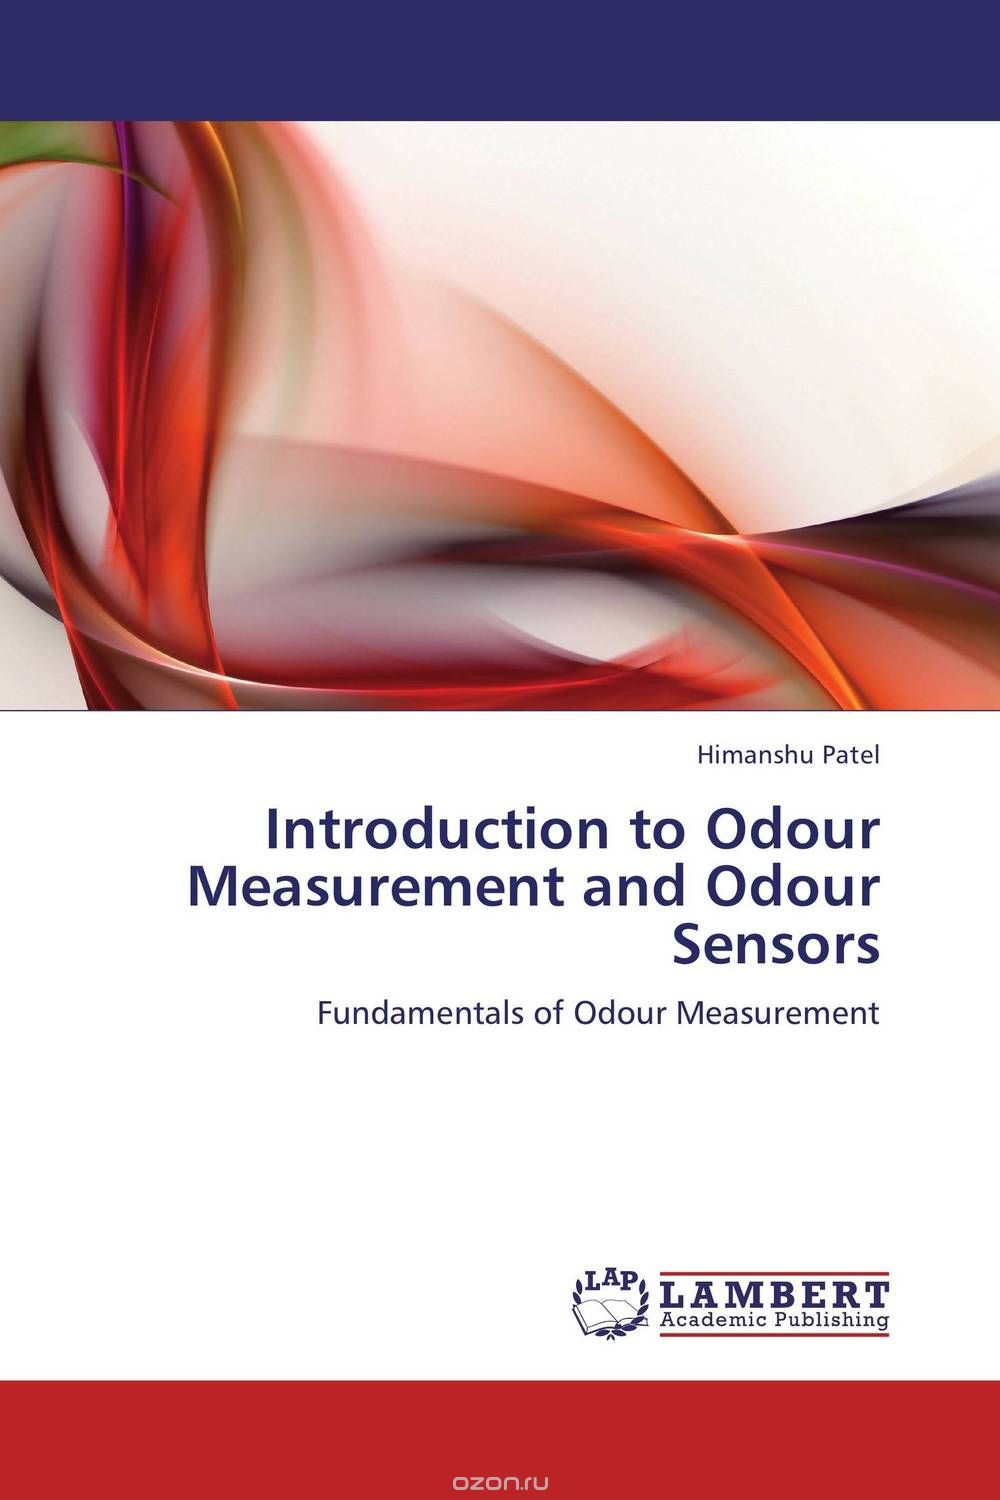 Introduction to Odour Measurement and Odour Sensors